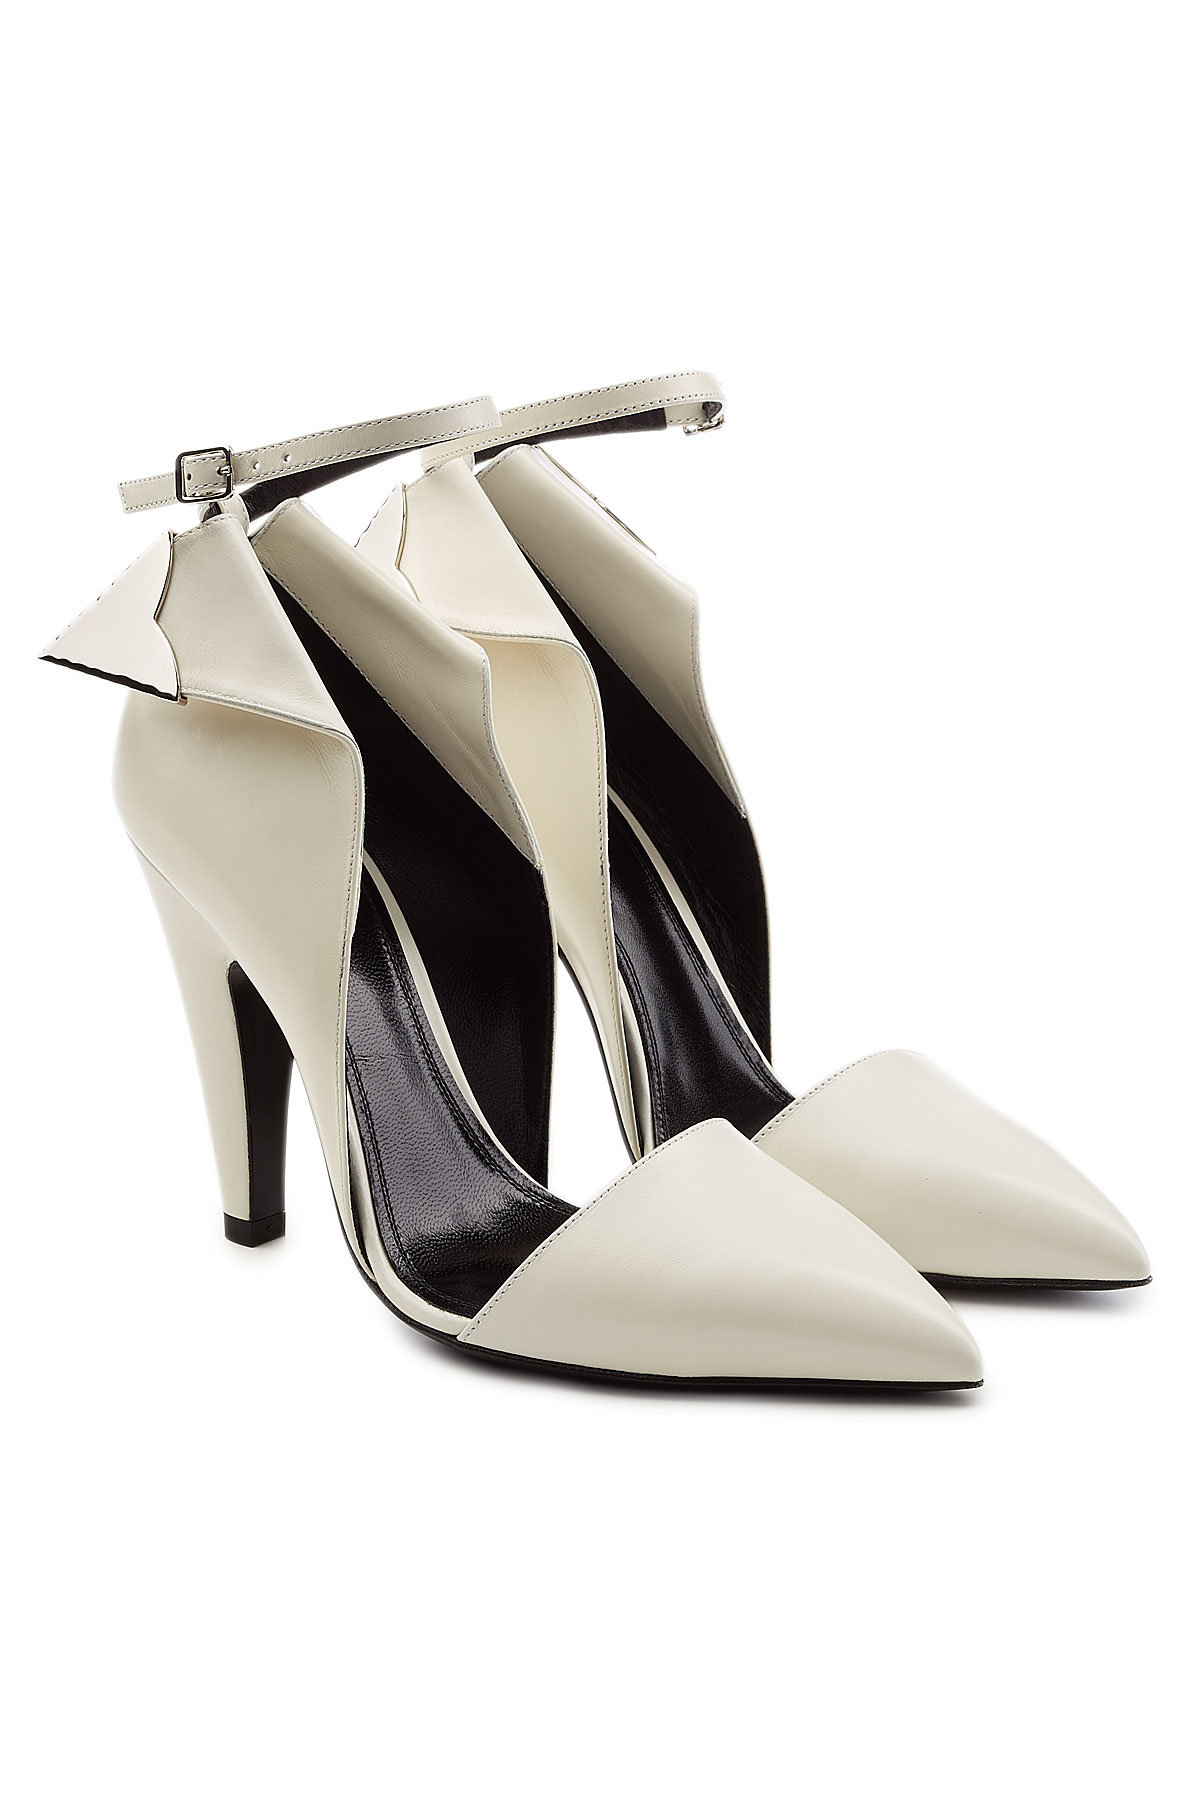 Kadence Leather Pumps by CALVIN KLEIN 205W39NYC